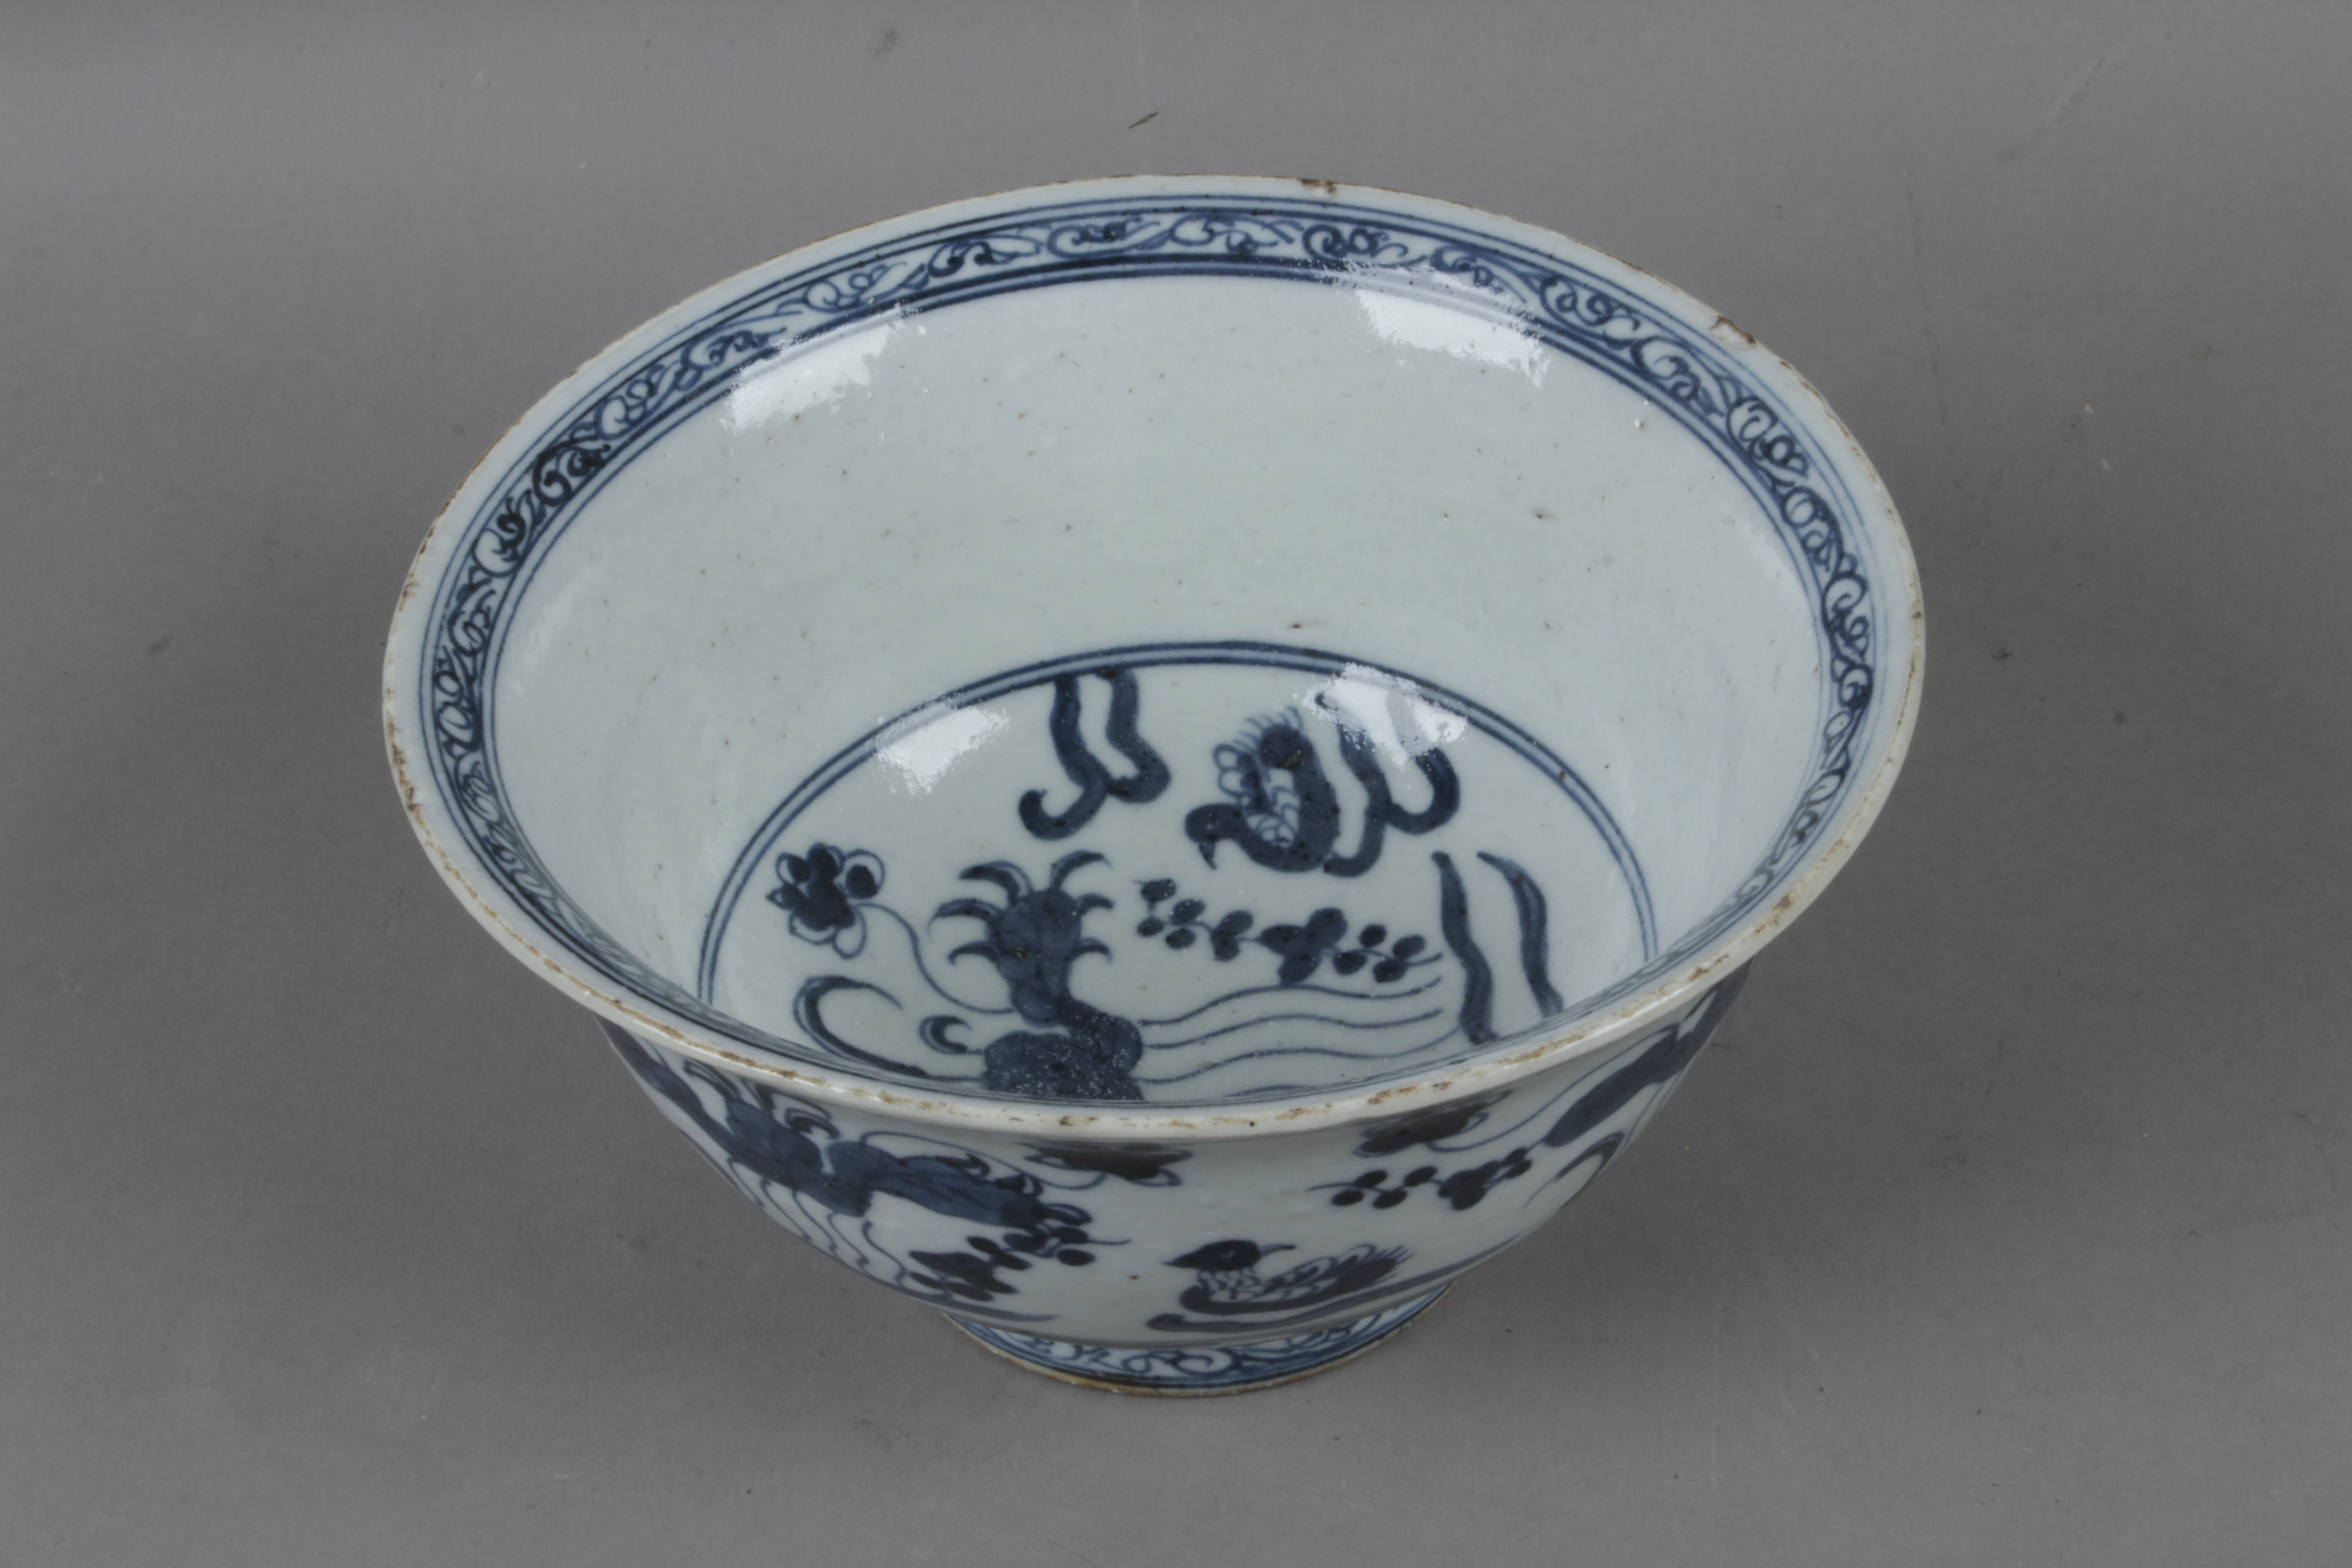 A 20th century Chinese porcelain bowl - Image 3 of 5